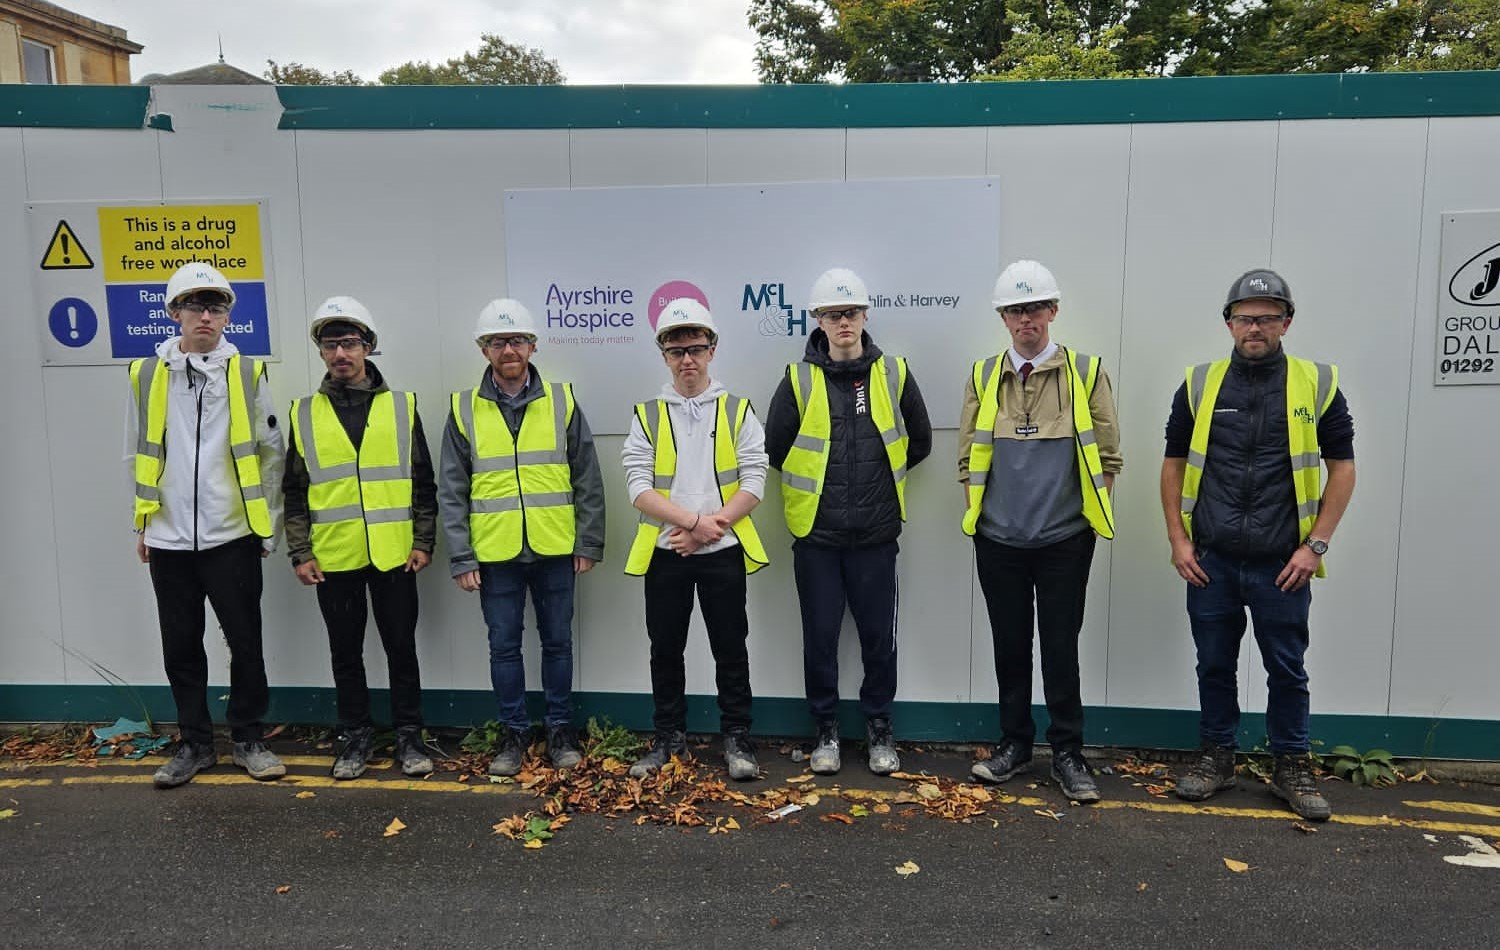 Site visit to Ayrshire Hospice redevelopment for college Civil Engineering students